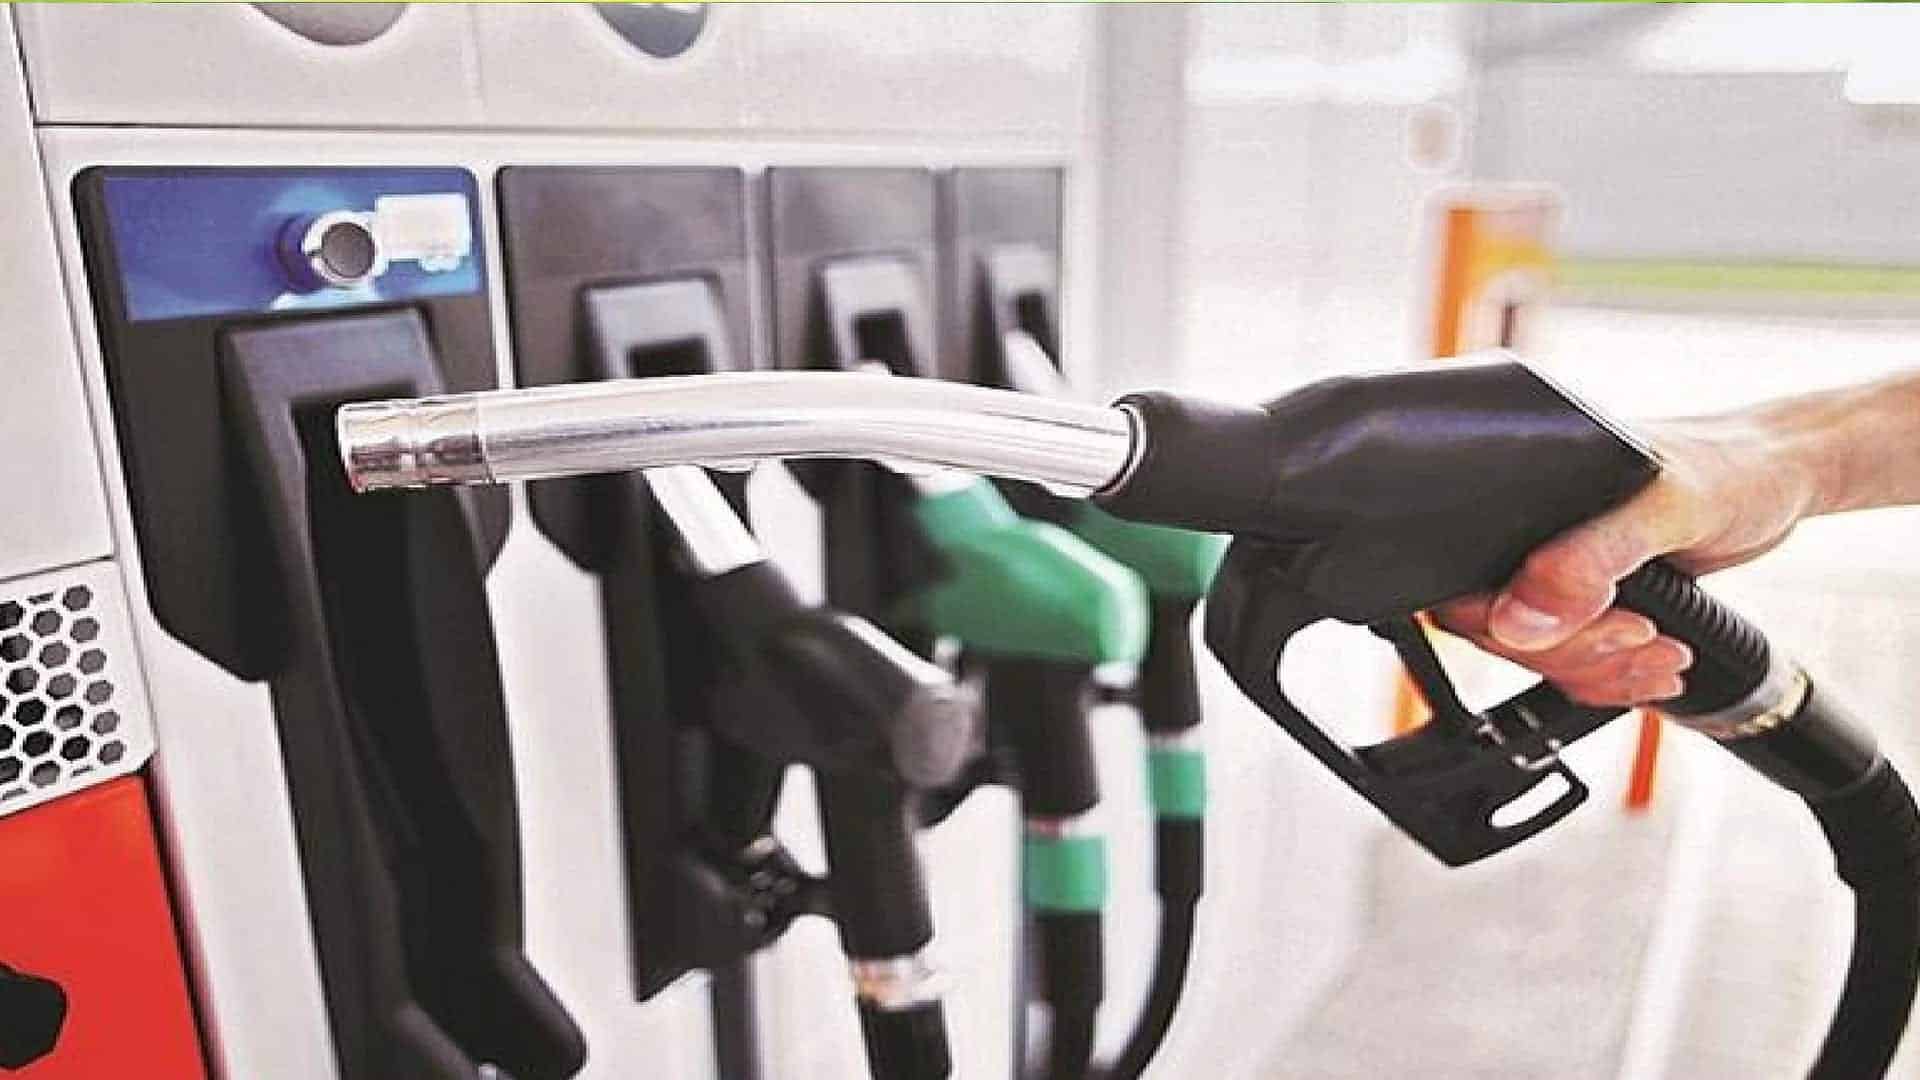 Petrol crosses Rs 100 in Delhi after 80 paise hike, diesel up 70 paise